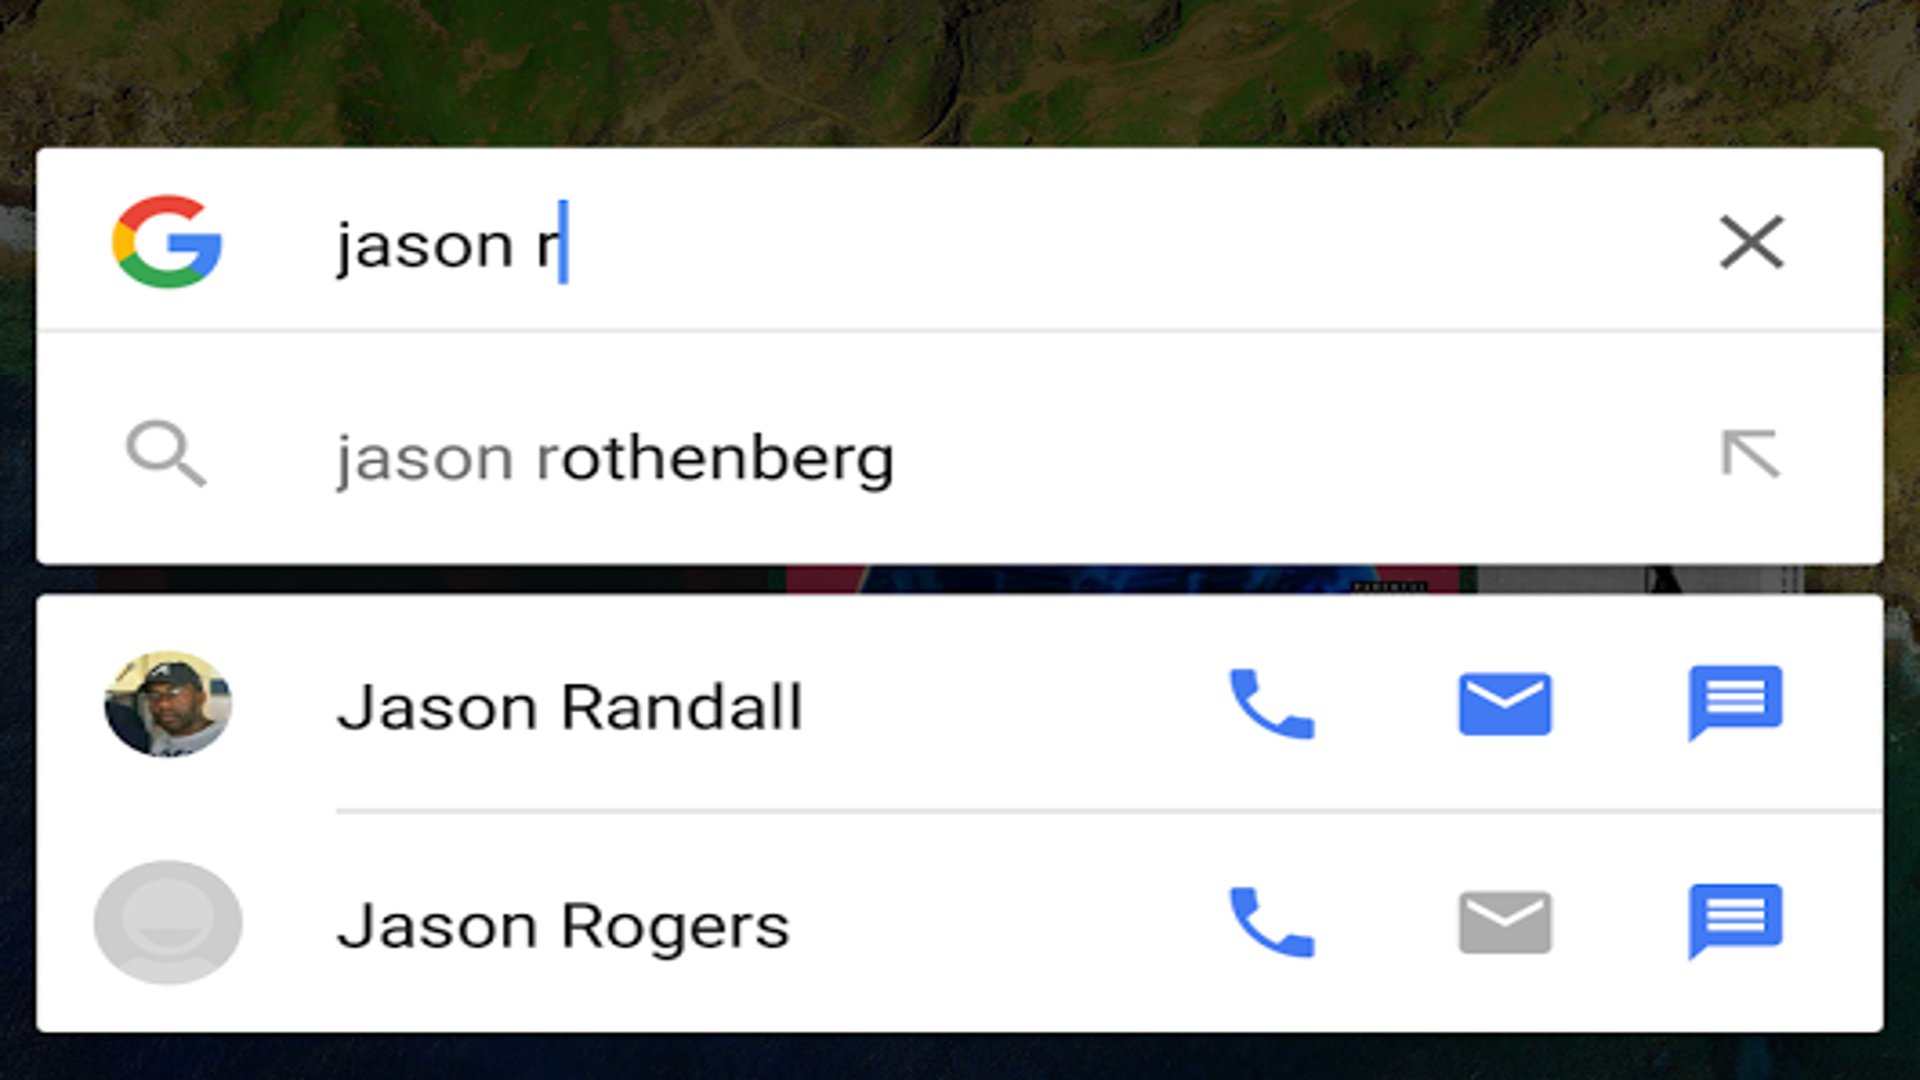 Google Search Show Contacts With Quick Actions